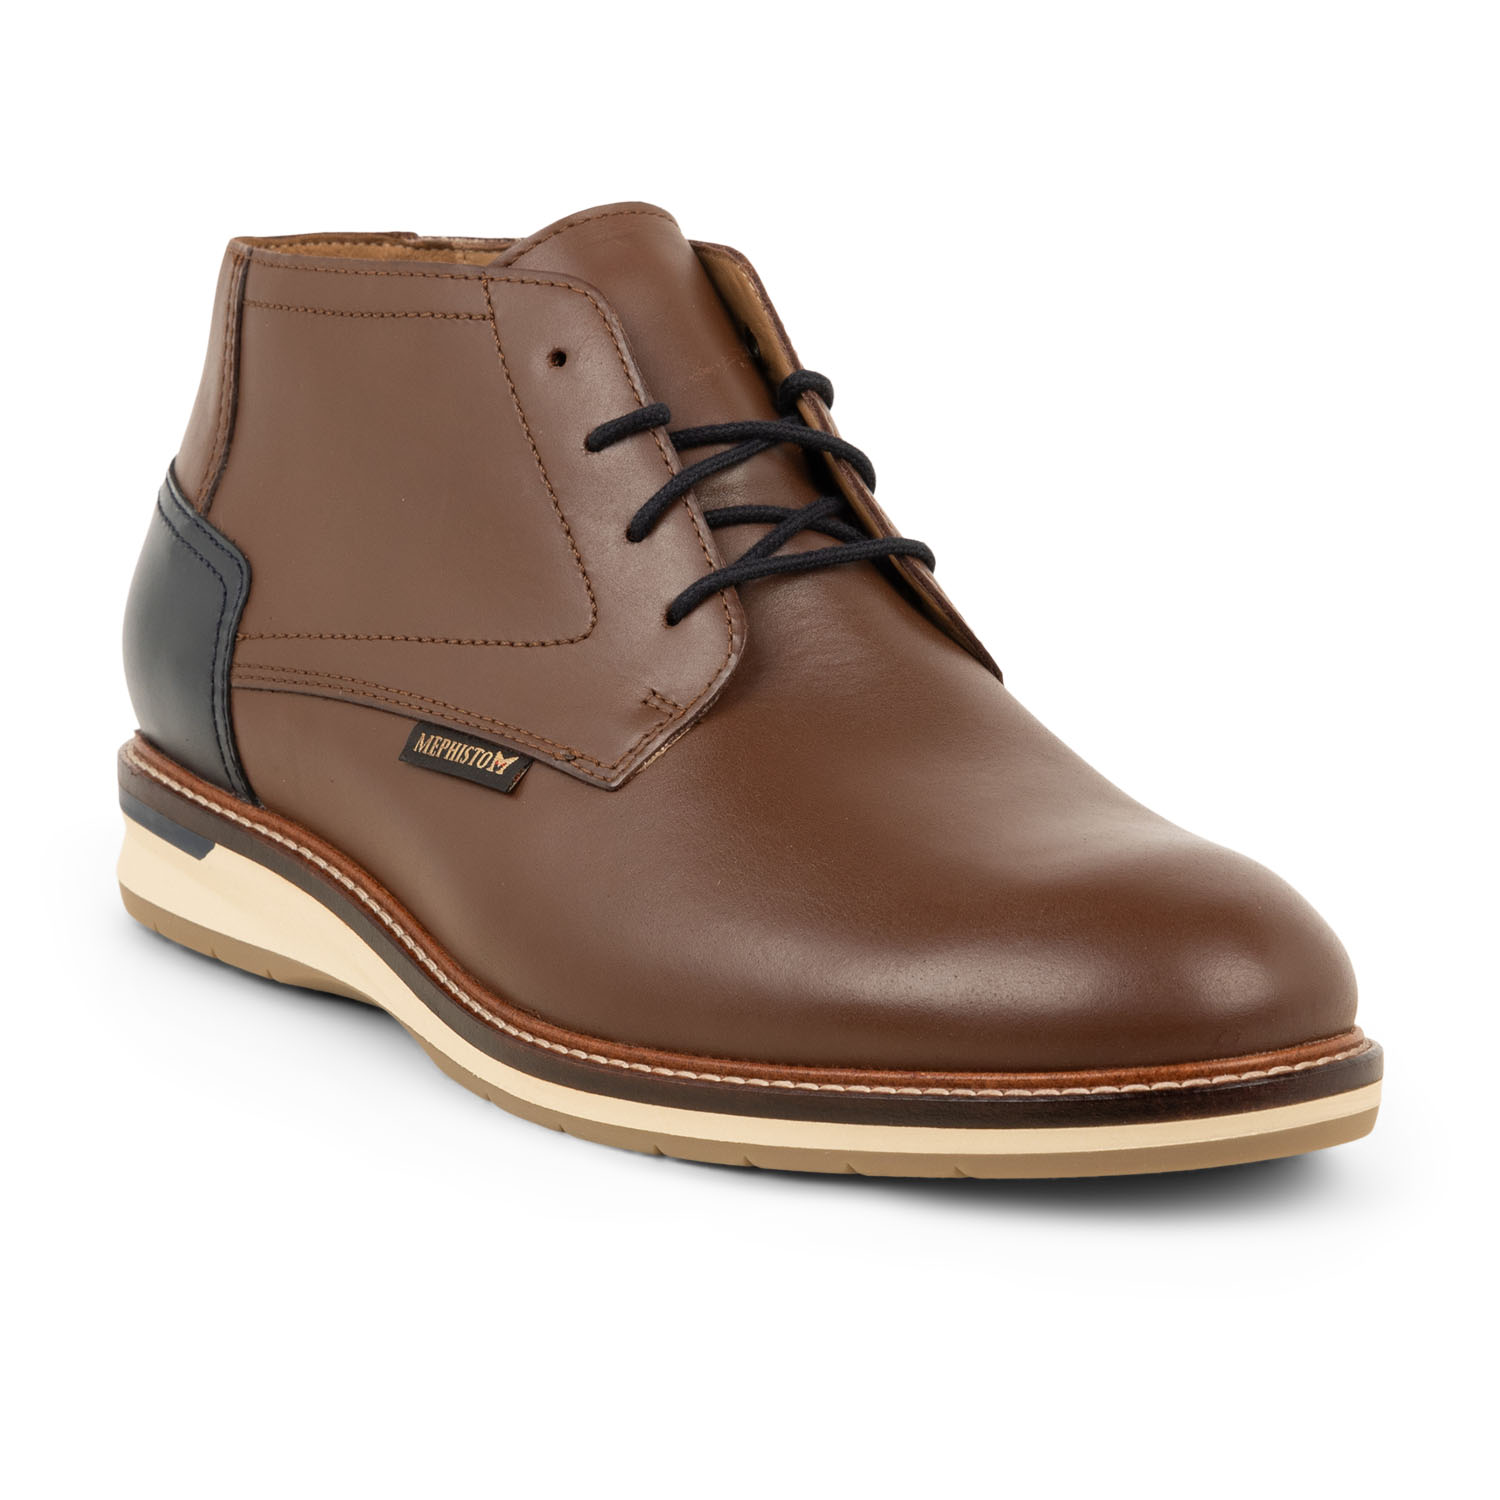 02 - FREDERICO - MEPHISTO - Chaussures à lacets - Cuir